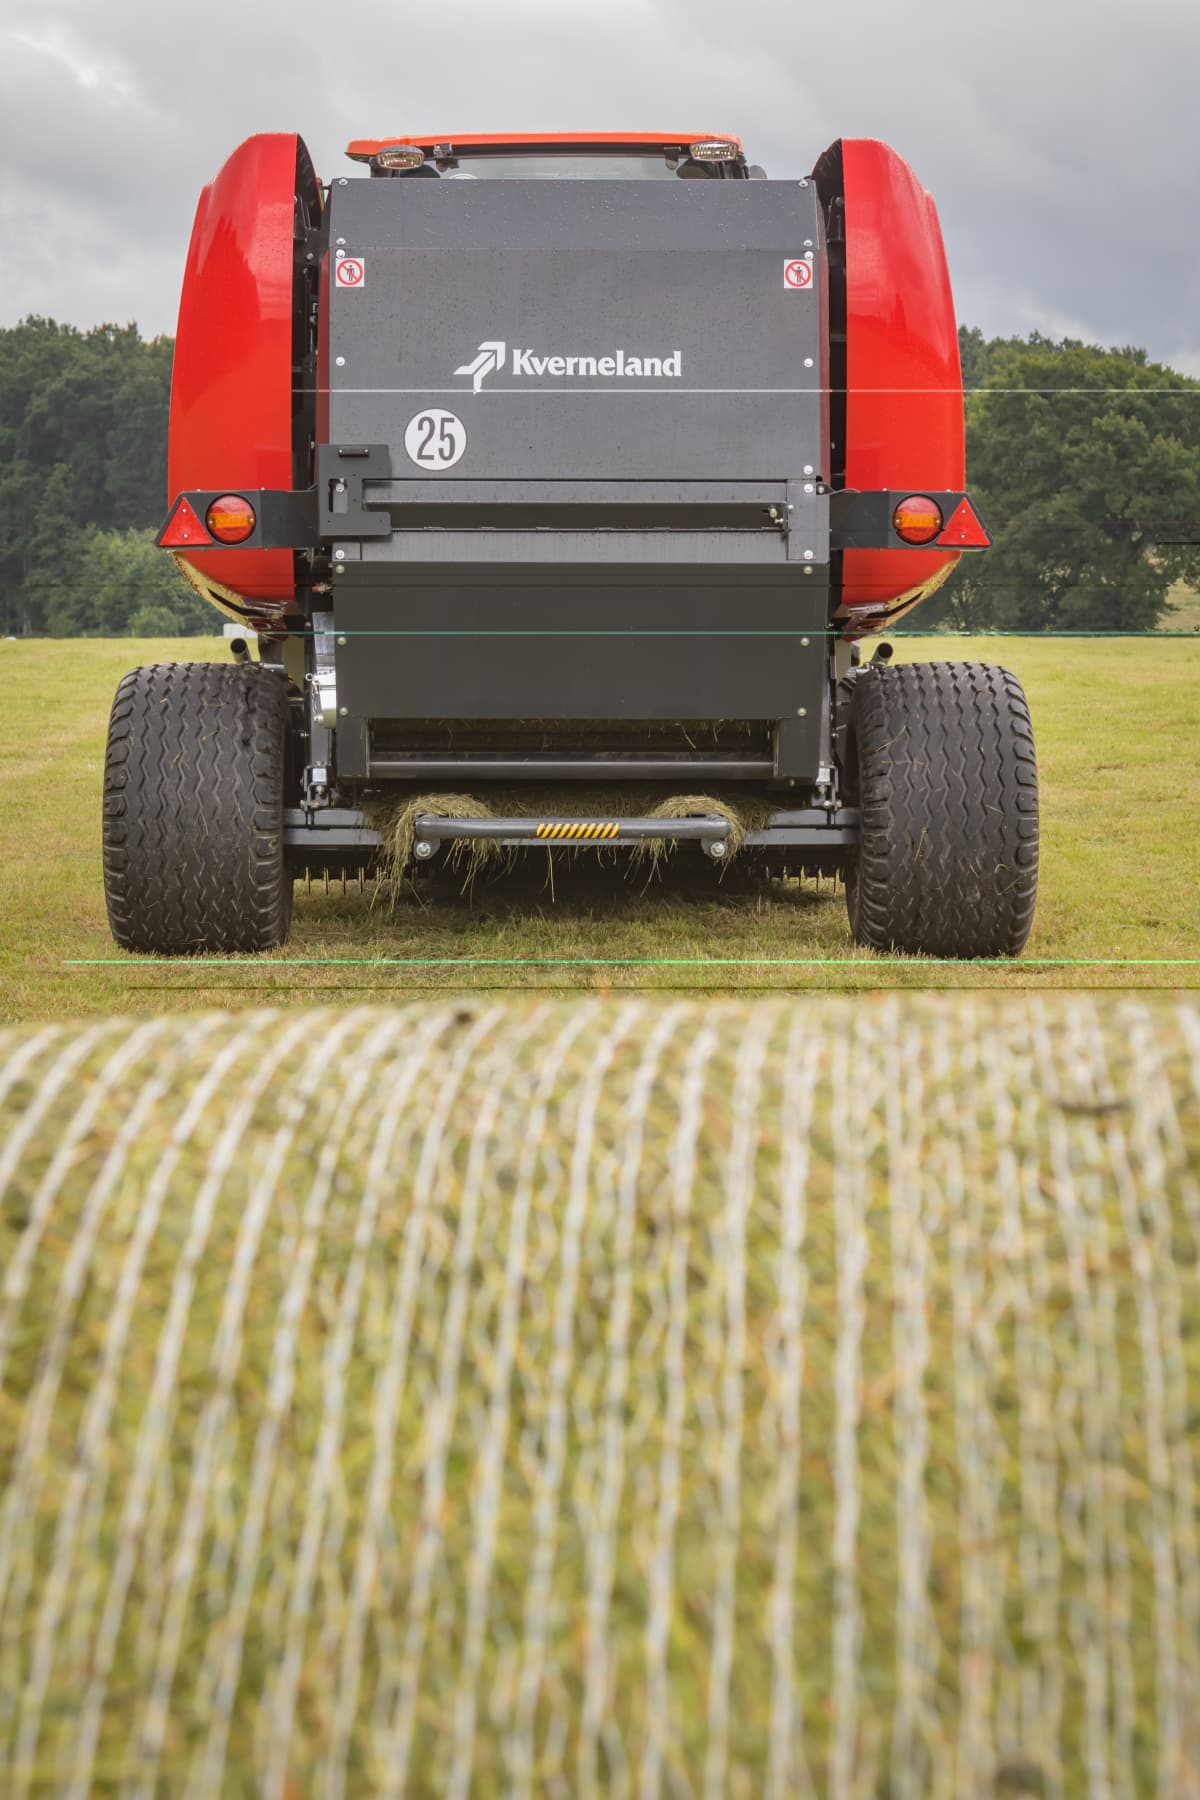 Fixed Chamber round balers - Kverneland 6350 Plus, produced for efficient use and silage conditions